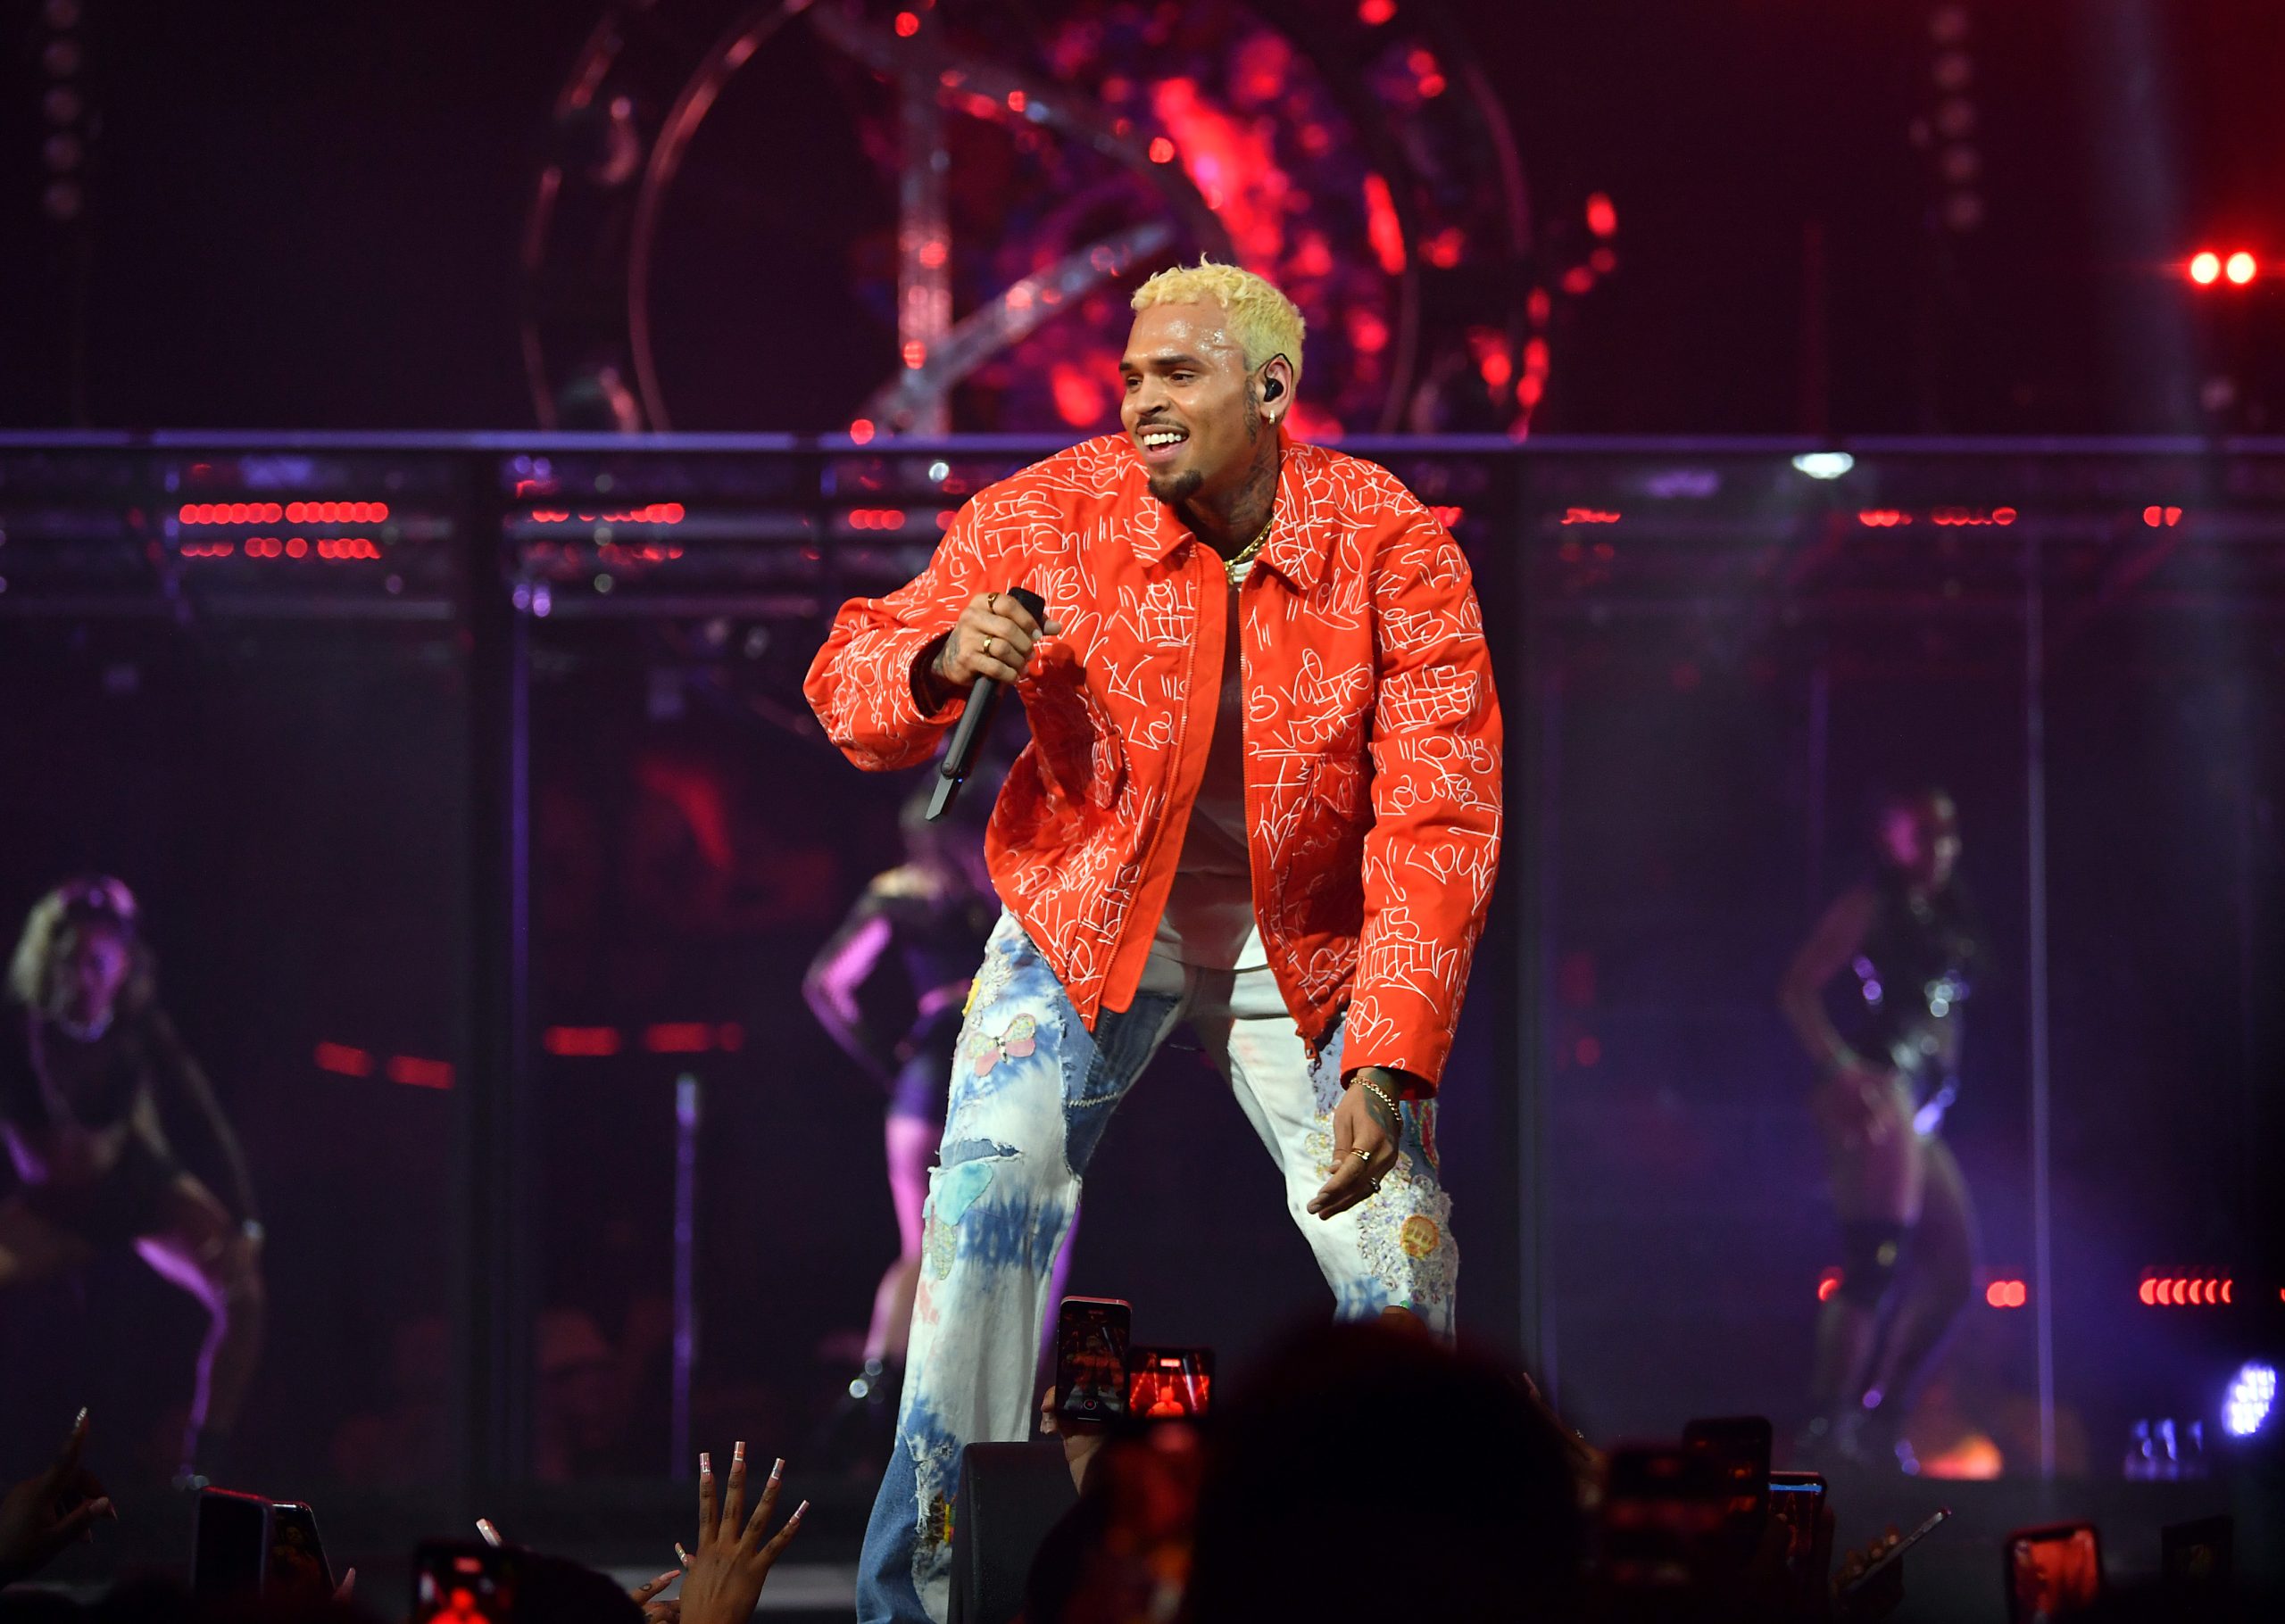 LAS VEGAS, NEVADA - JUNE 11: Singer/songwriter Chris Brown performs during the first show of his residency at Drai's Nightclub at The Cromwell Las Vegas Hotel and Casino on June 11, 2022 in Las Vegas, Nevada. (Photo by Denise Truscello/Getty Images)